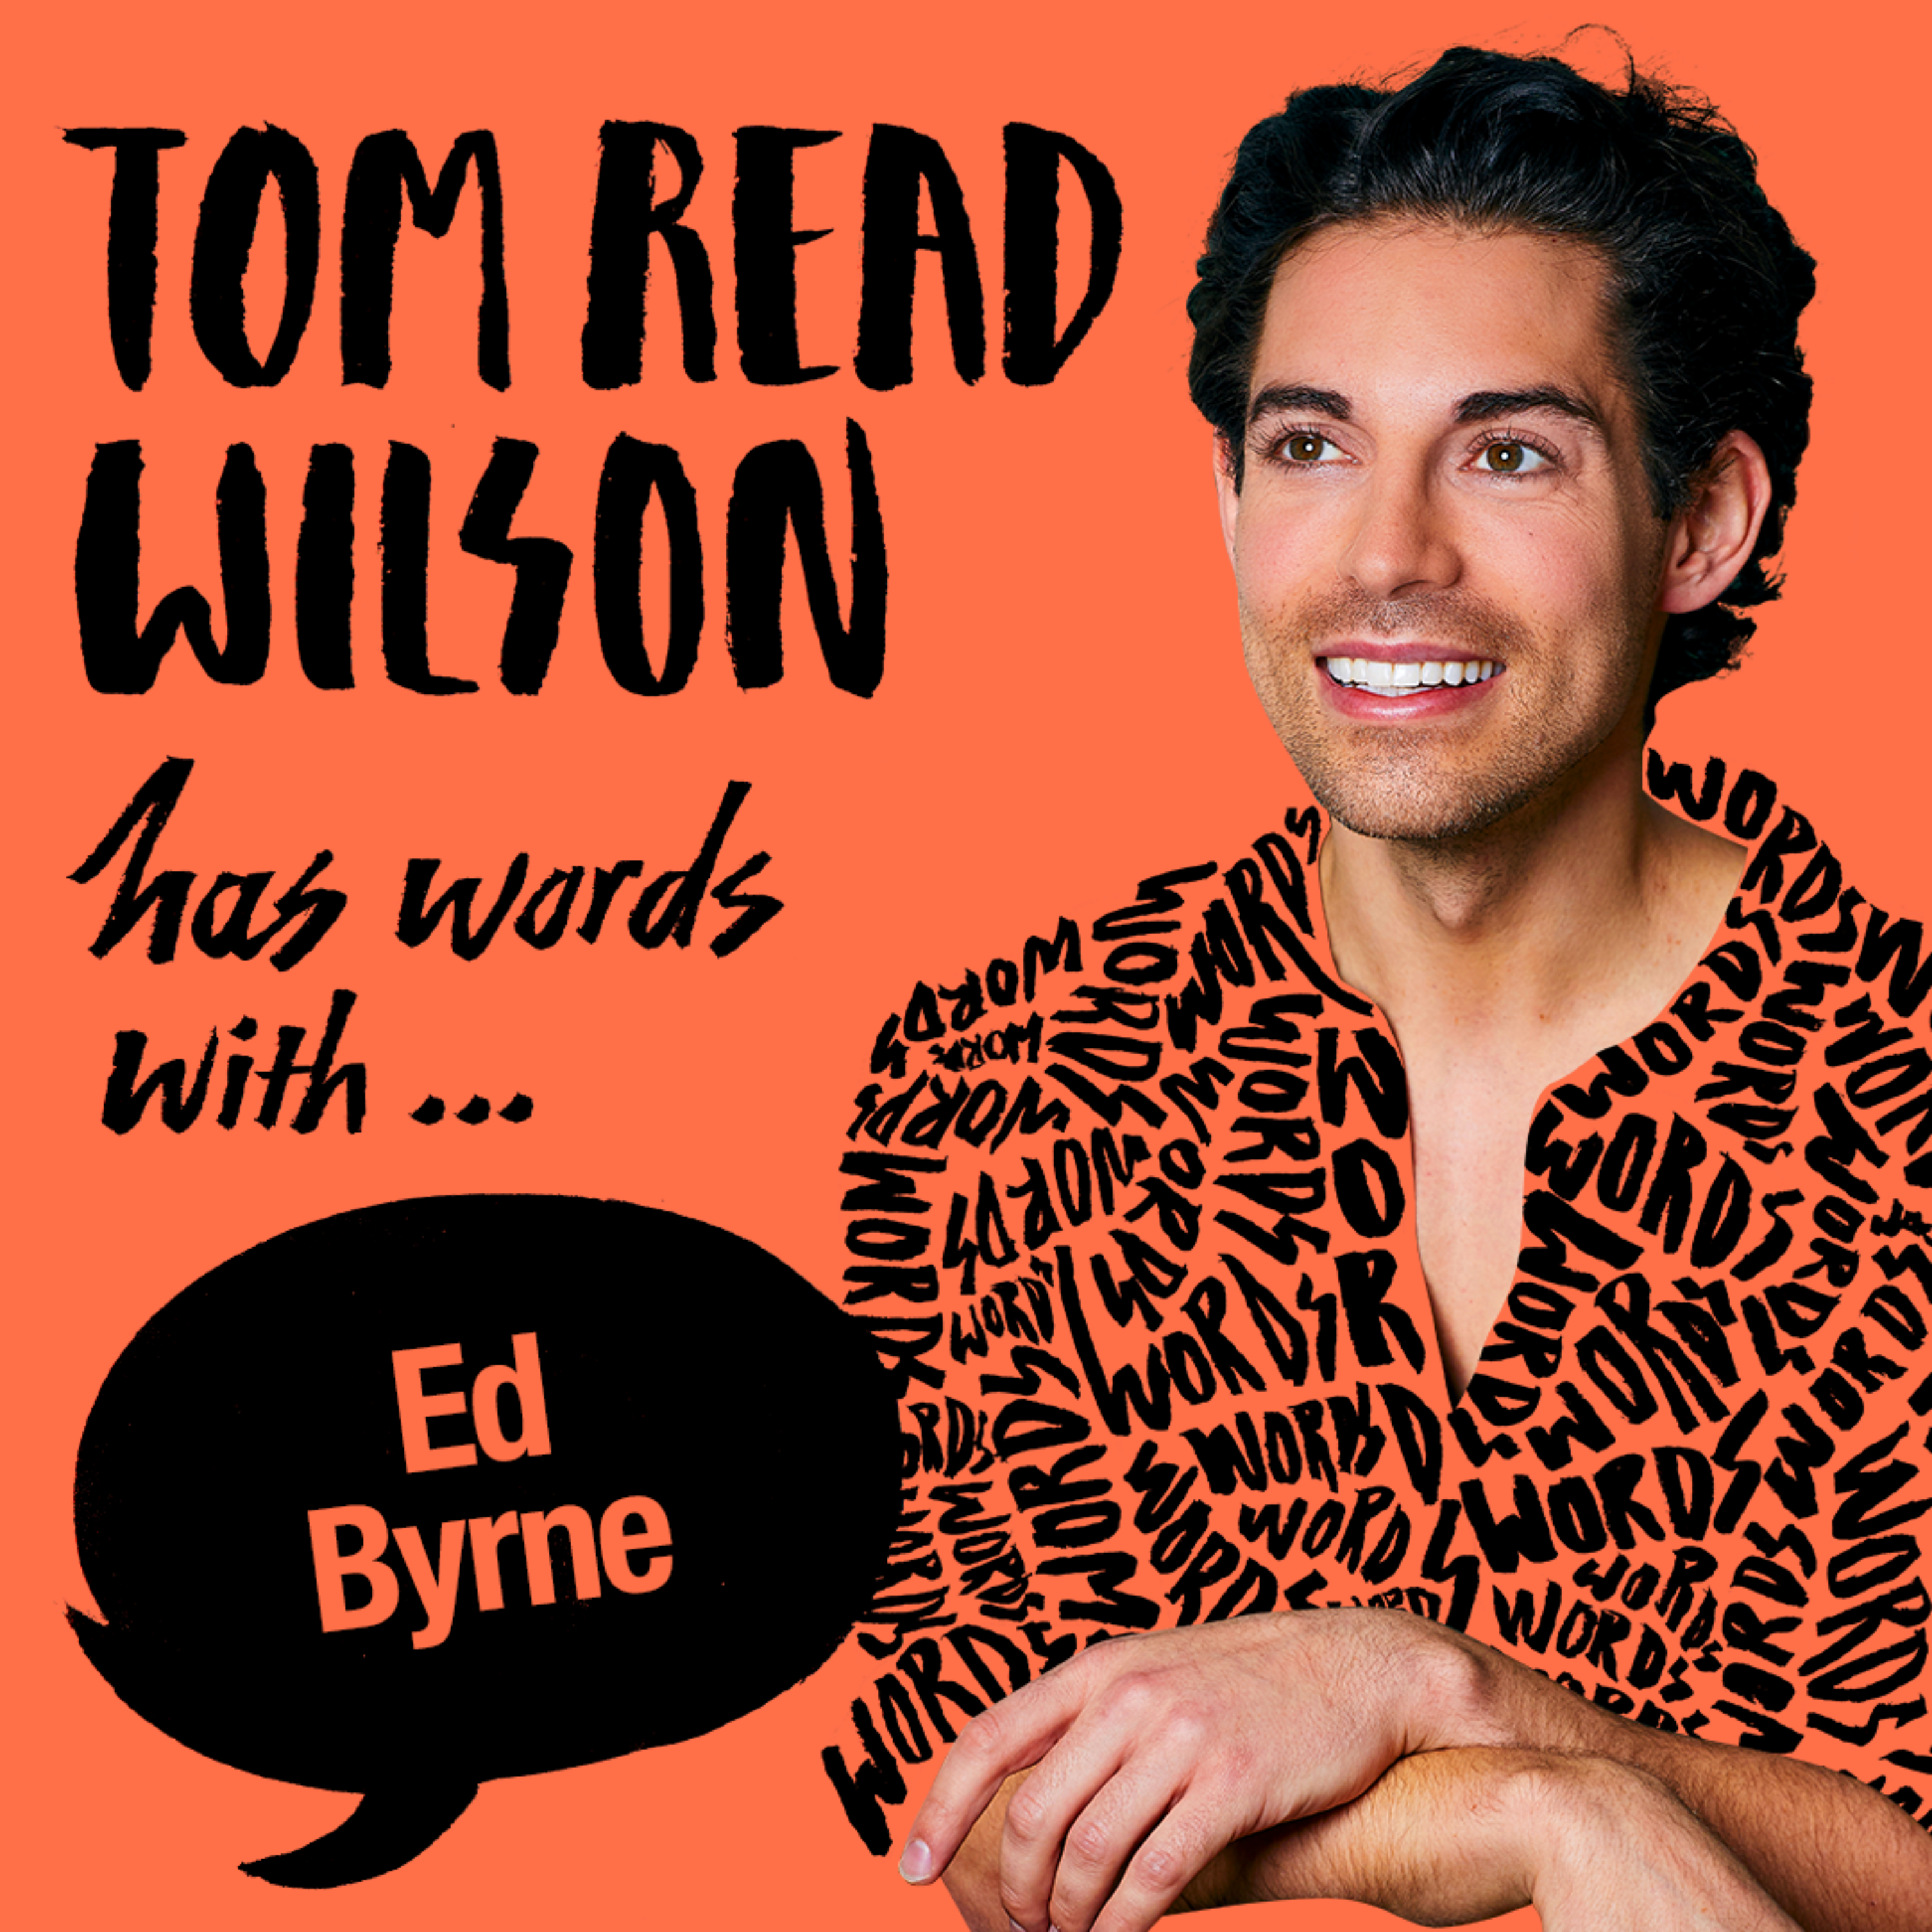 Tom Read Wilson has words with Ed Byrne